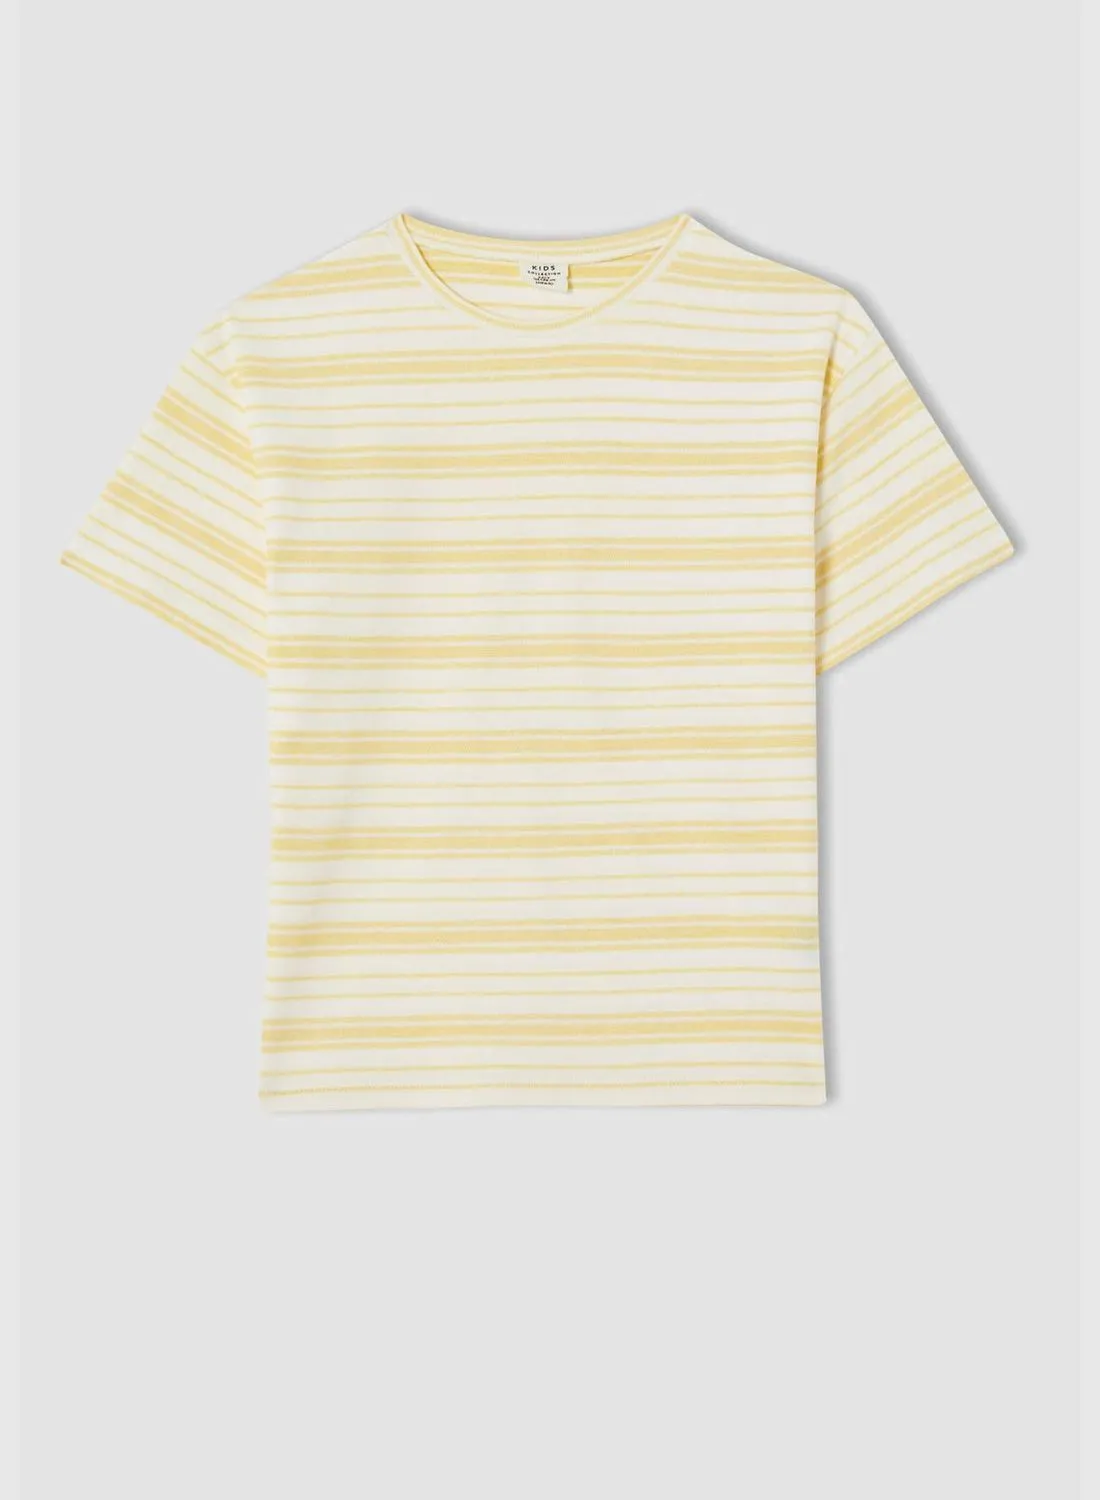 DeFacto Relaxed Fit Striped Short Sleeve Crew Neck T-Shirt